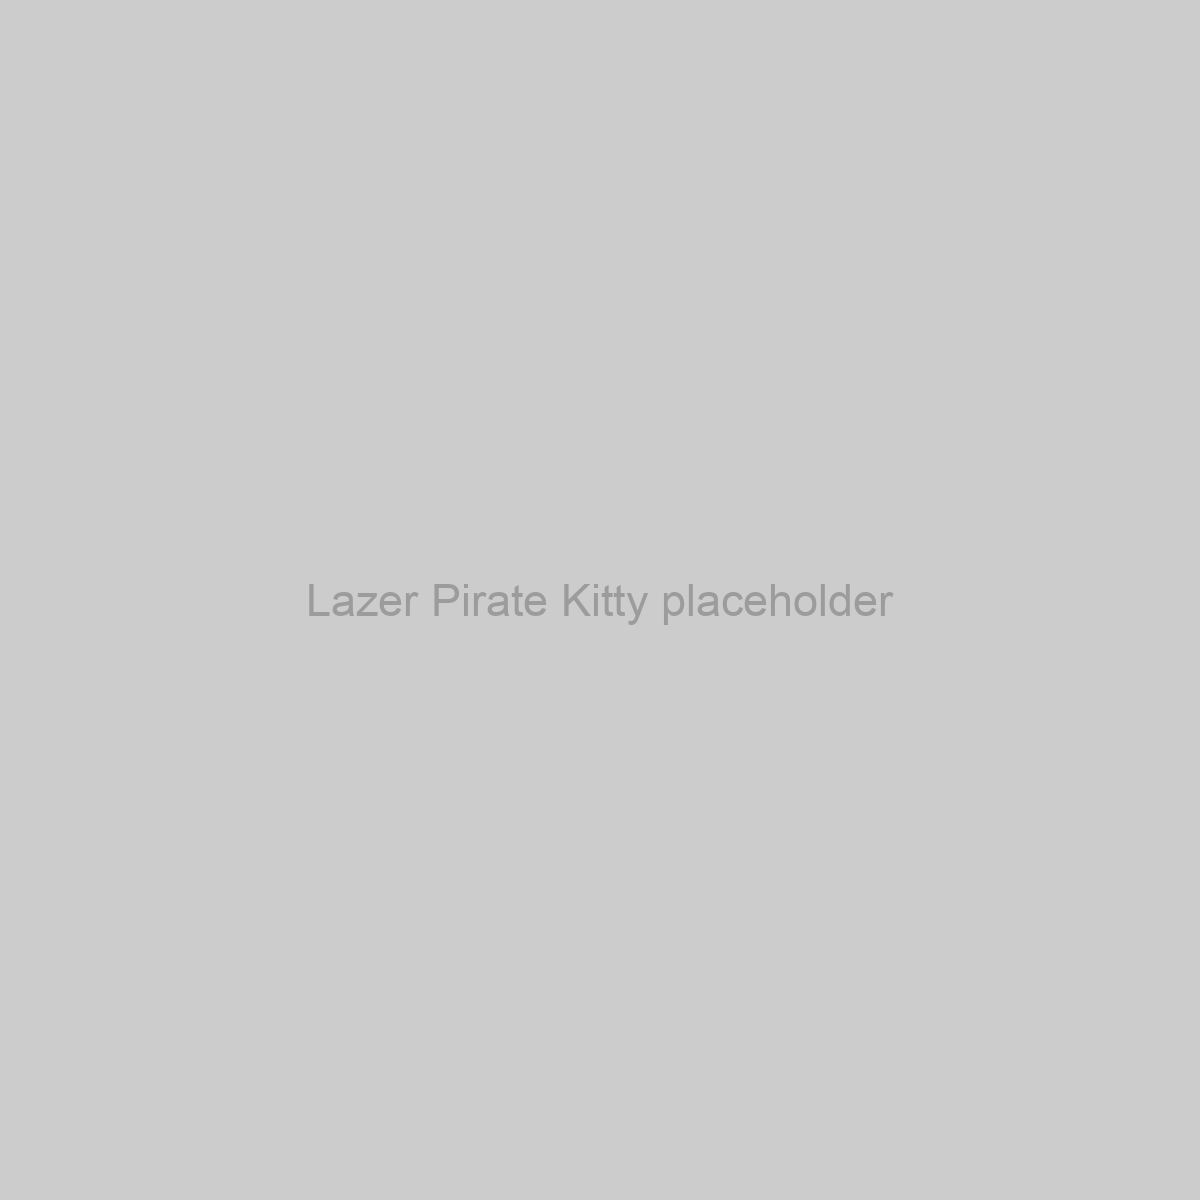 Lazer Pirate Kitty Placeholder Image